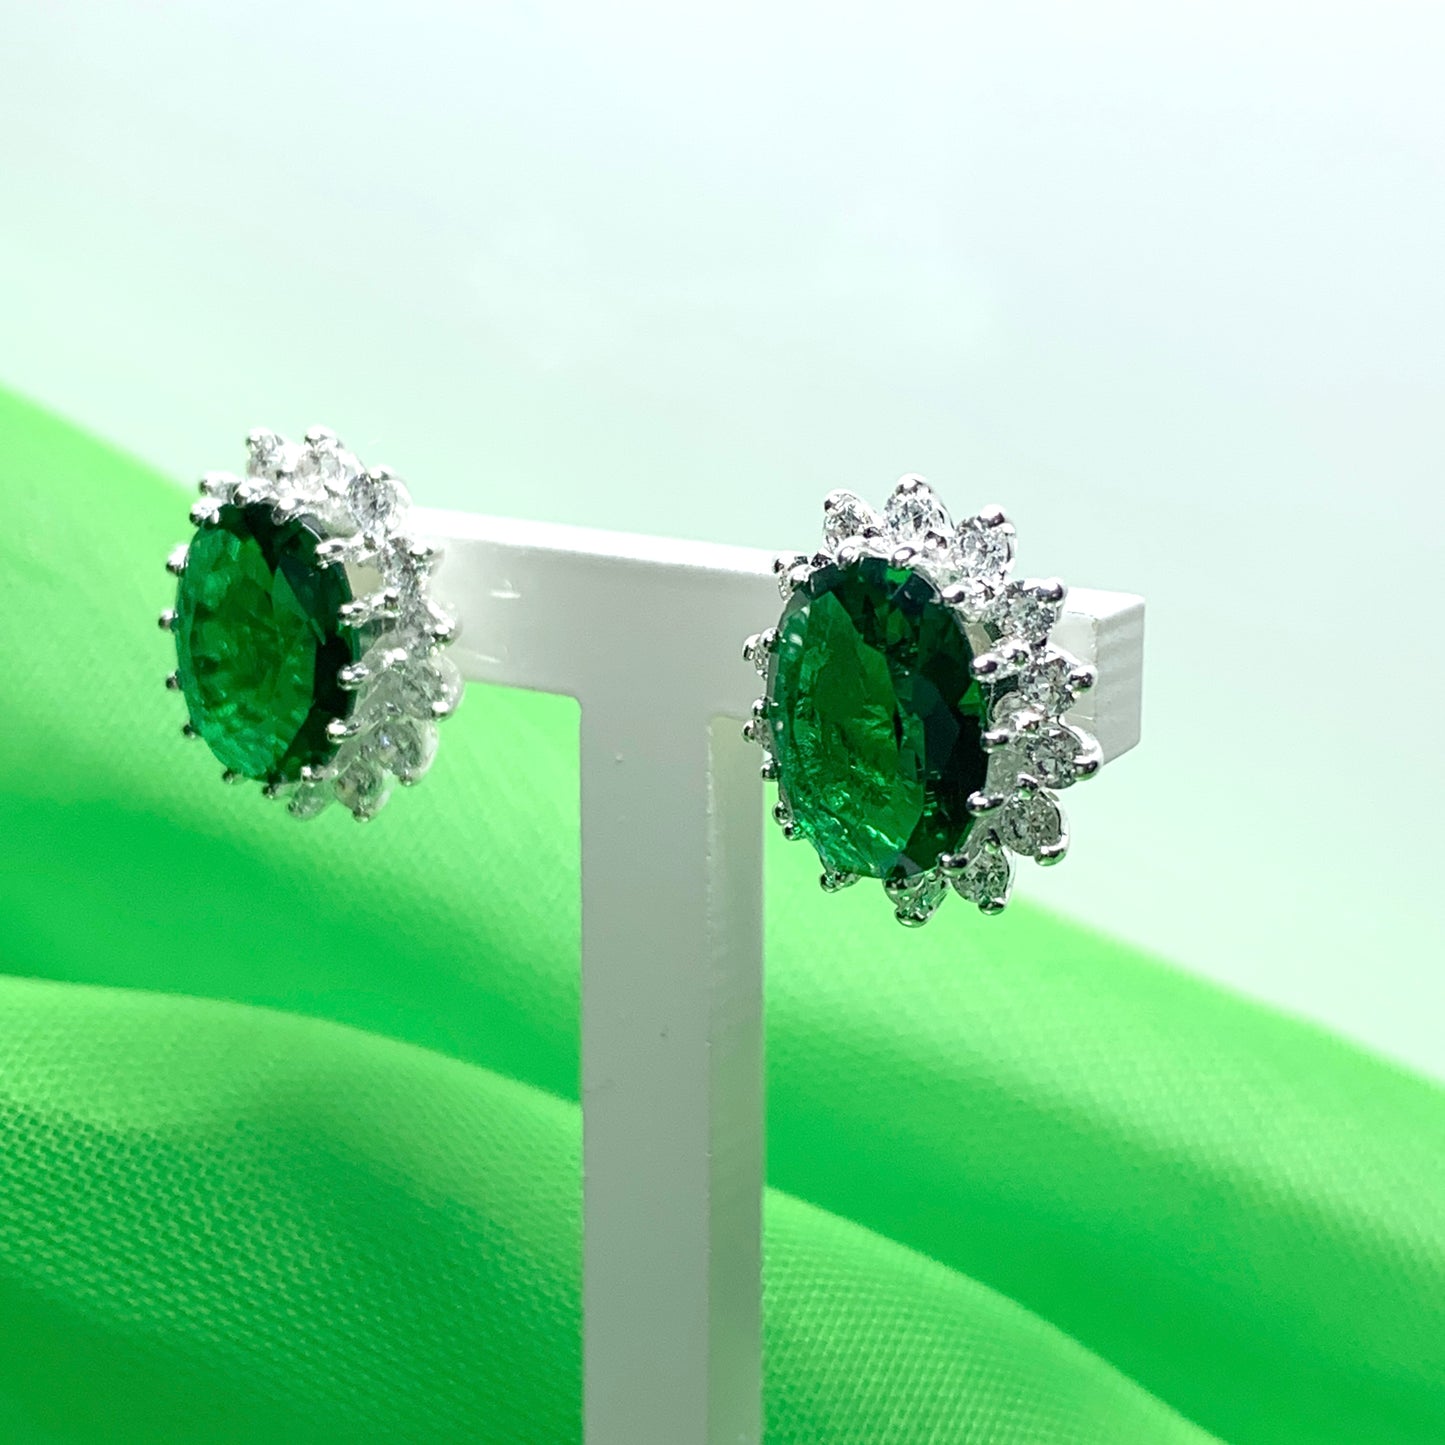 Large bright green and white cubic zirconia oval cluster dress cocktail stud earrings